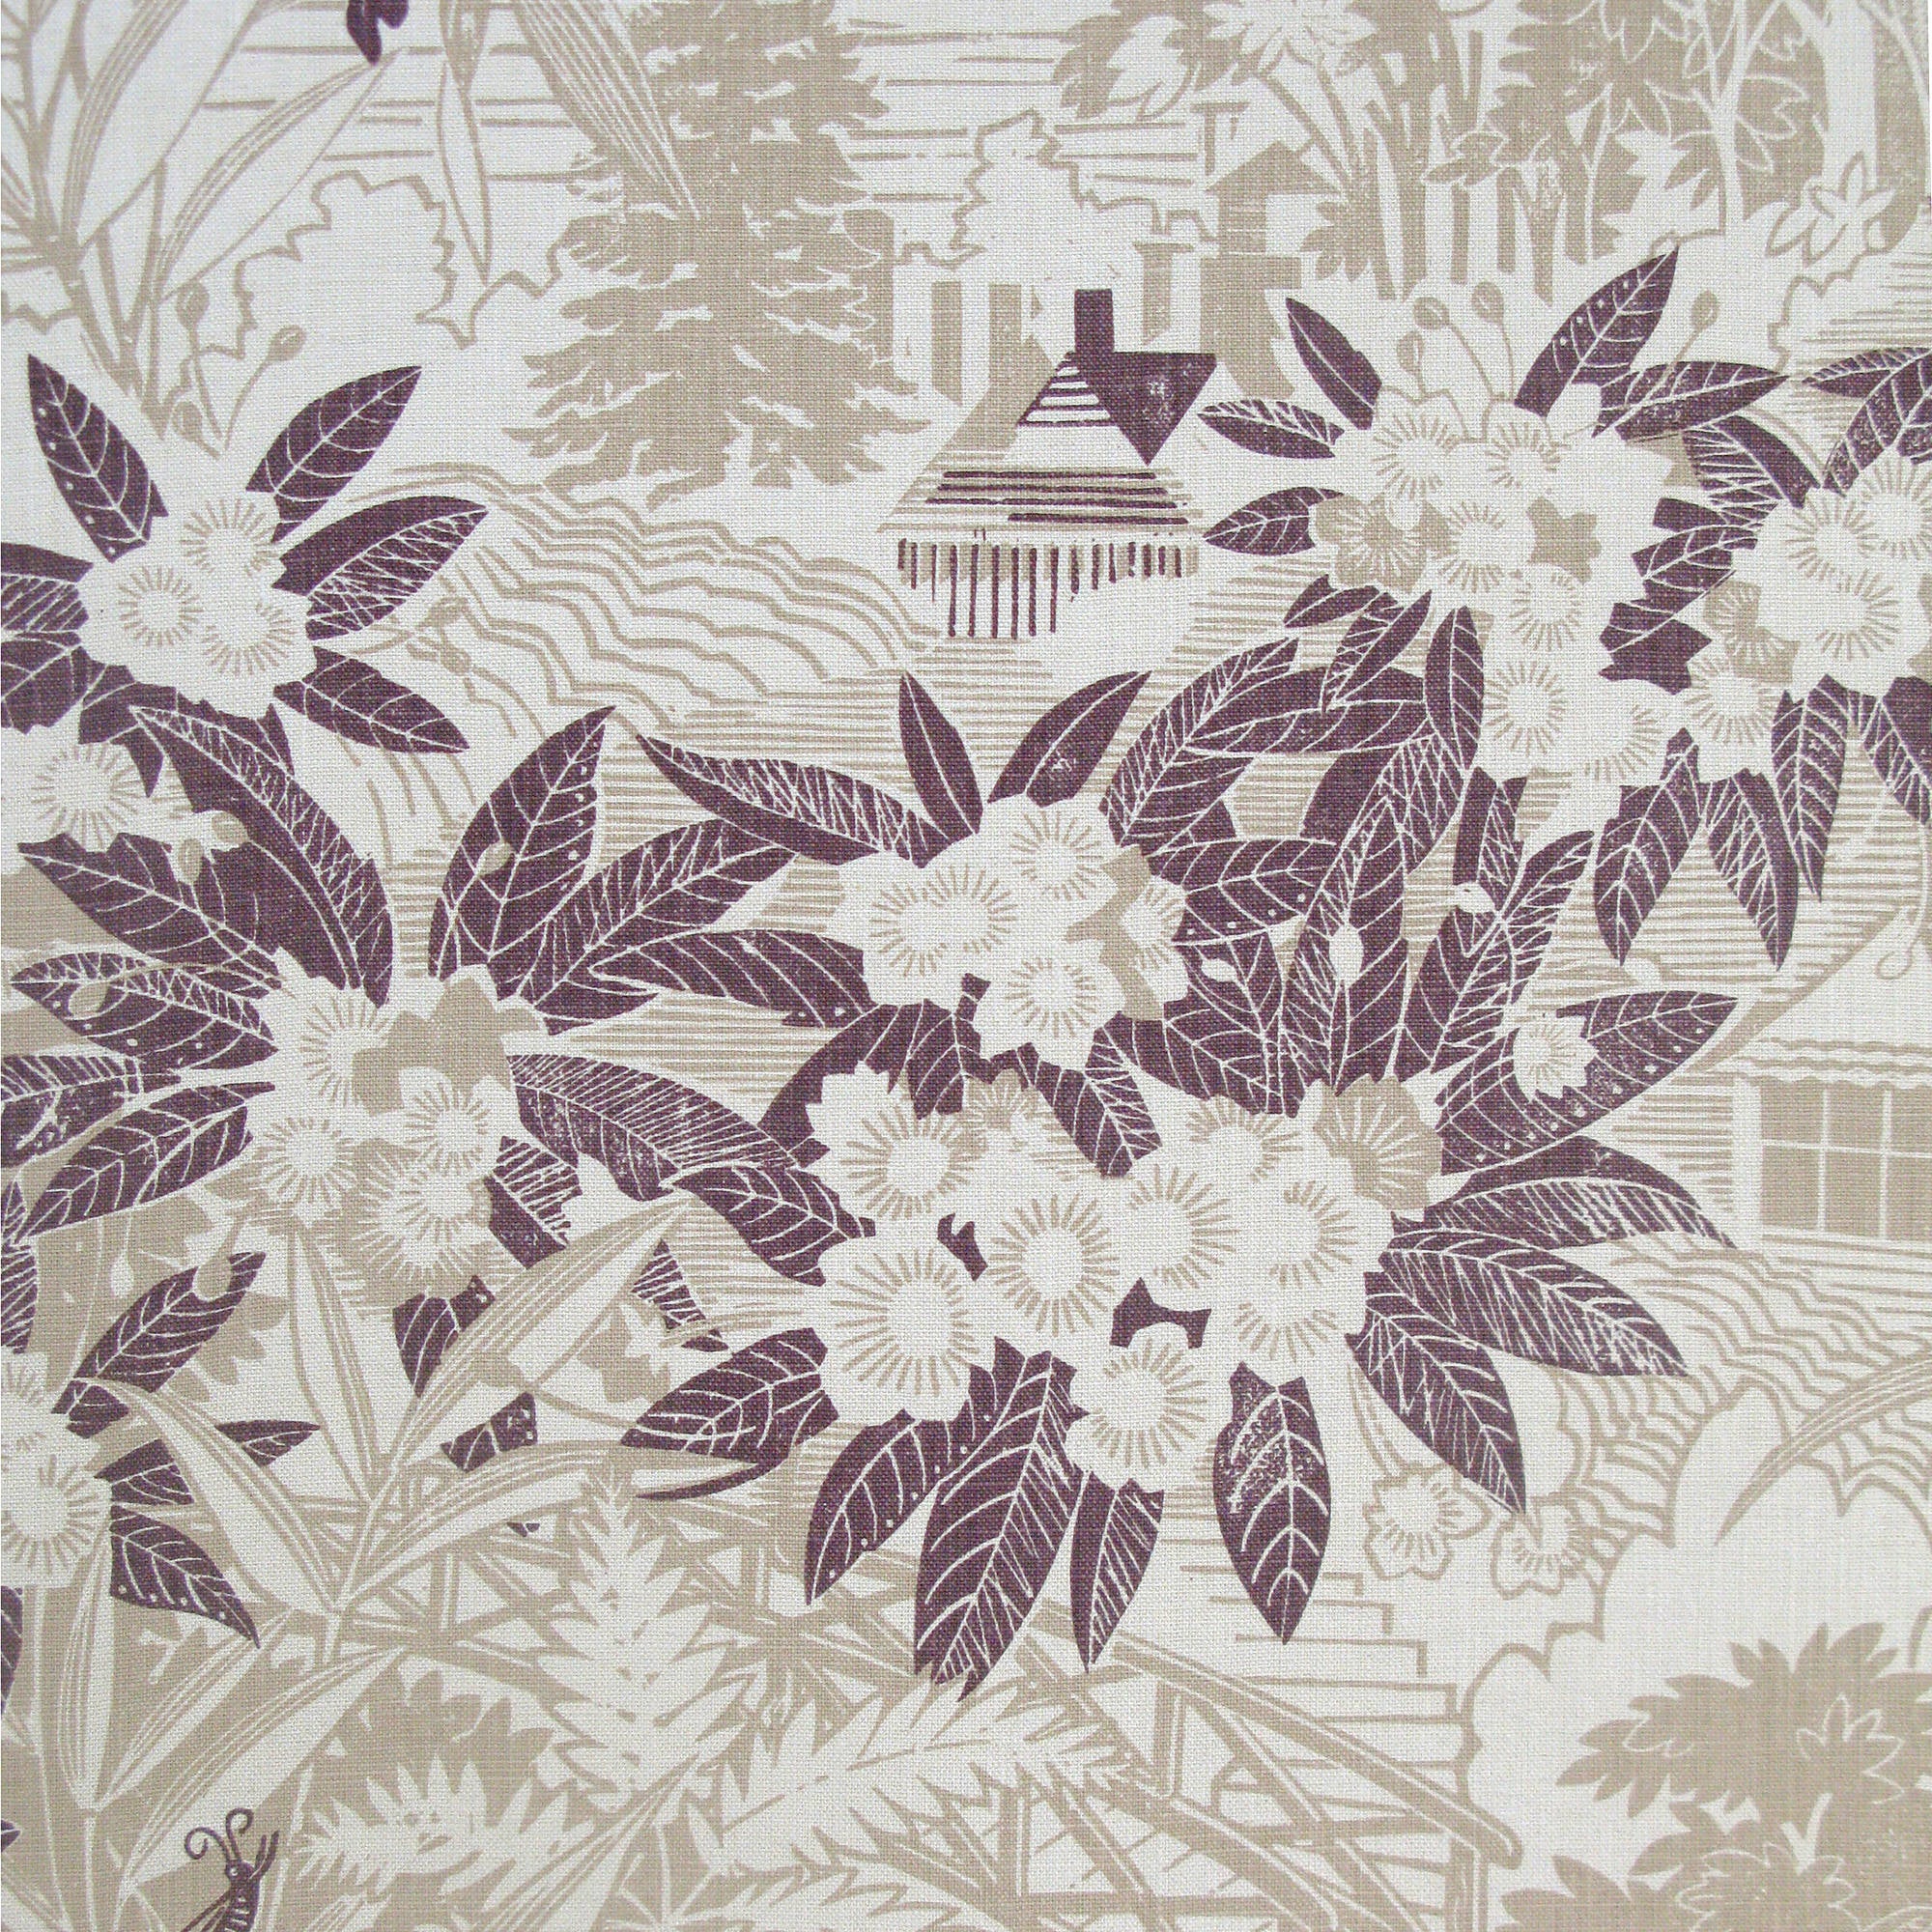 Detail of fabric in an intricate botanical, bridge and house print in tan and maroon on a cream field.